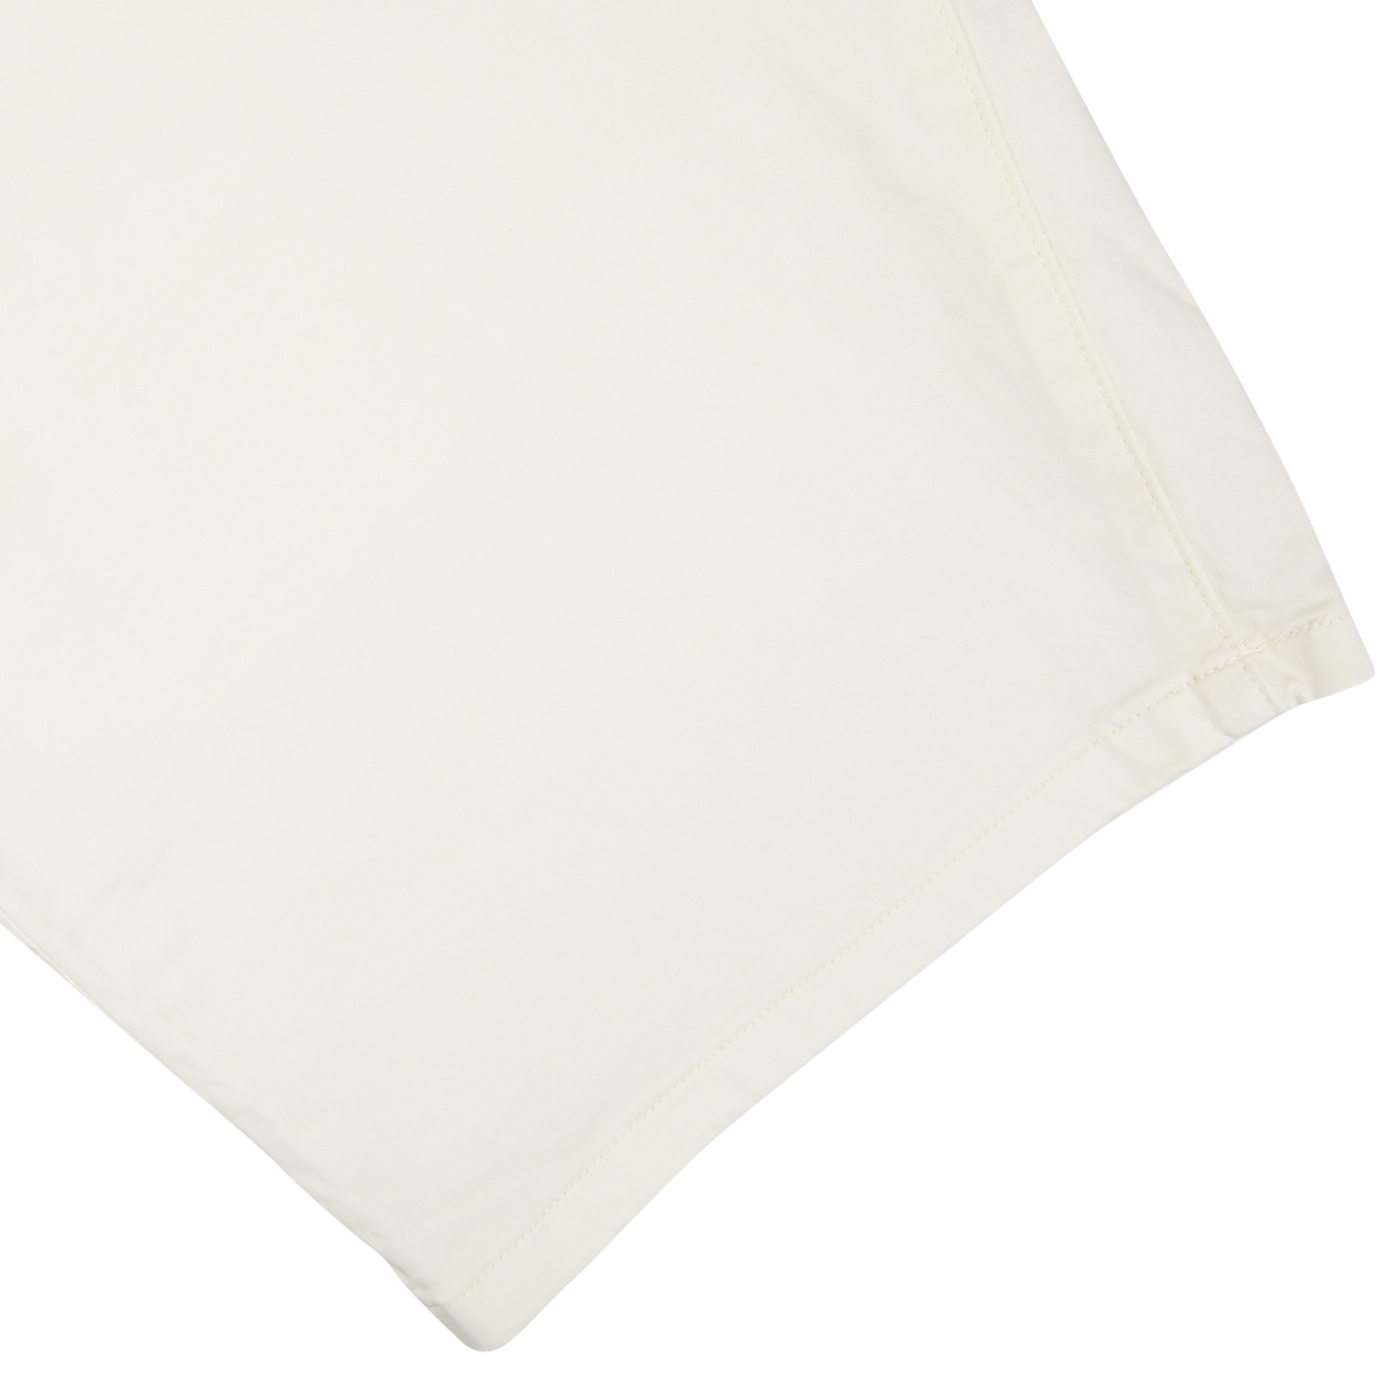 An image of Ecru Cotton Blend Philips Shorts by Paige on a white background.